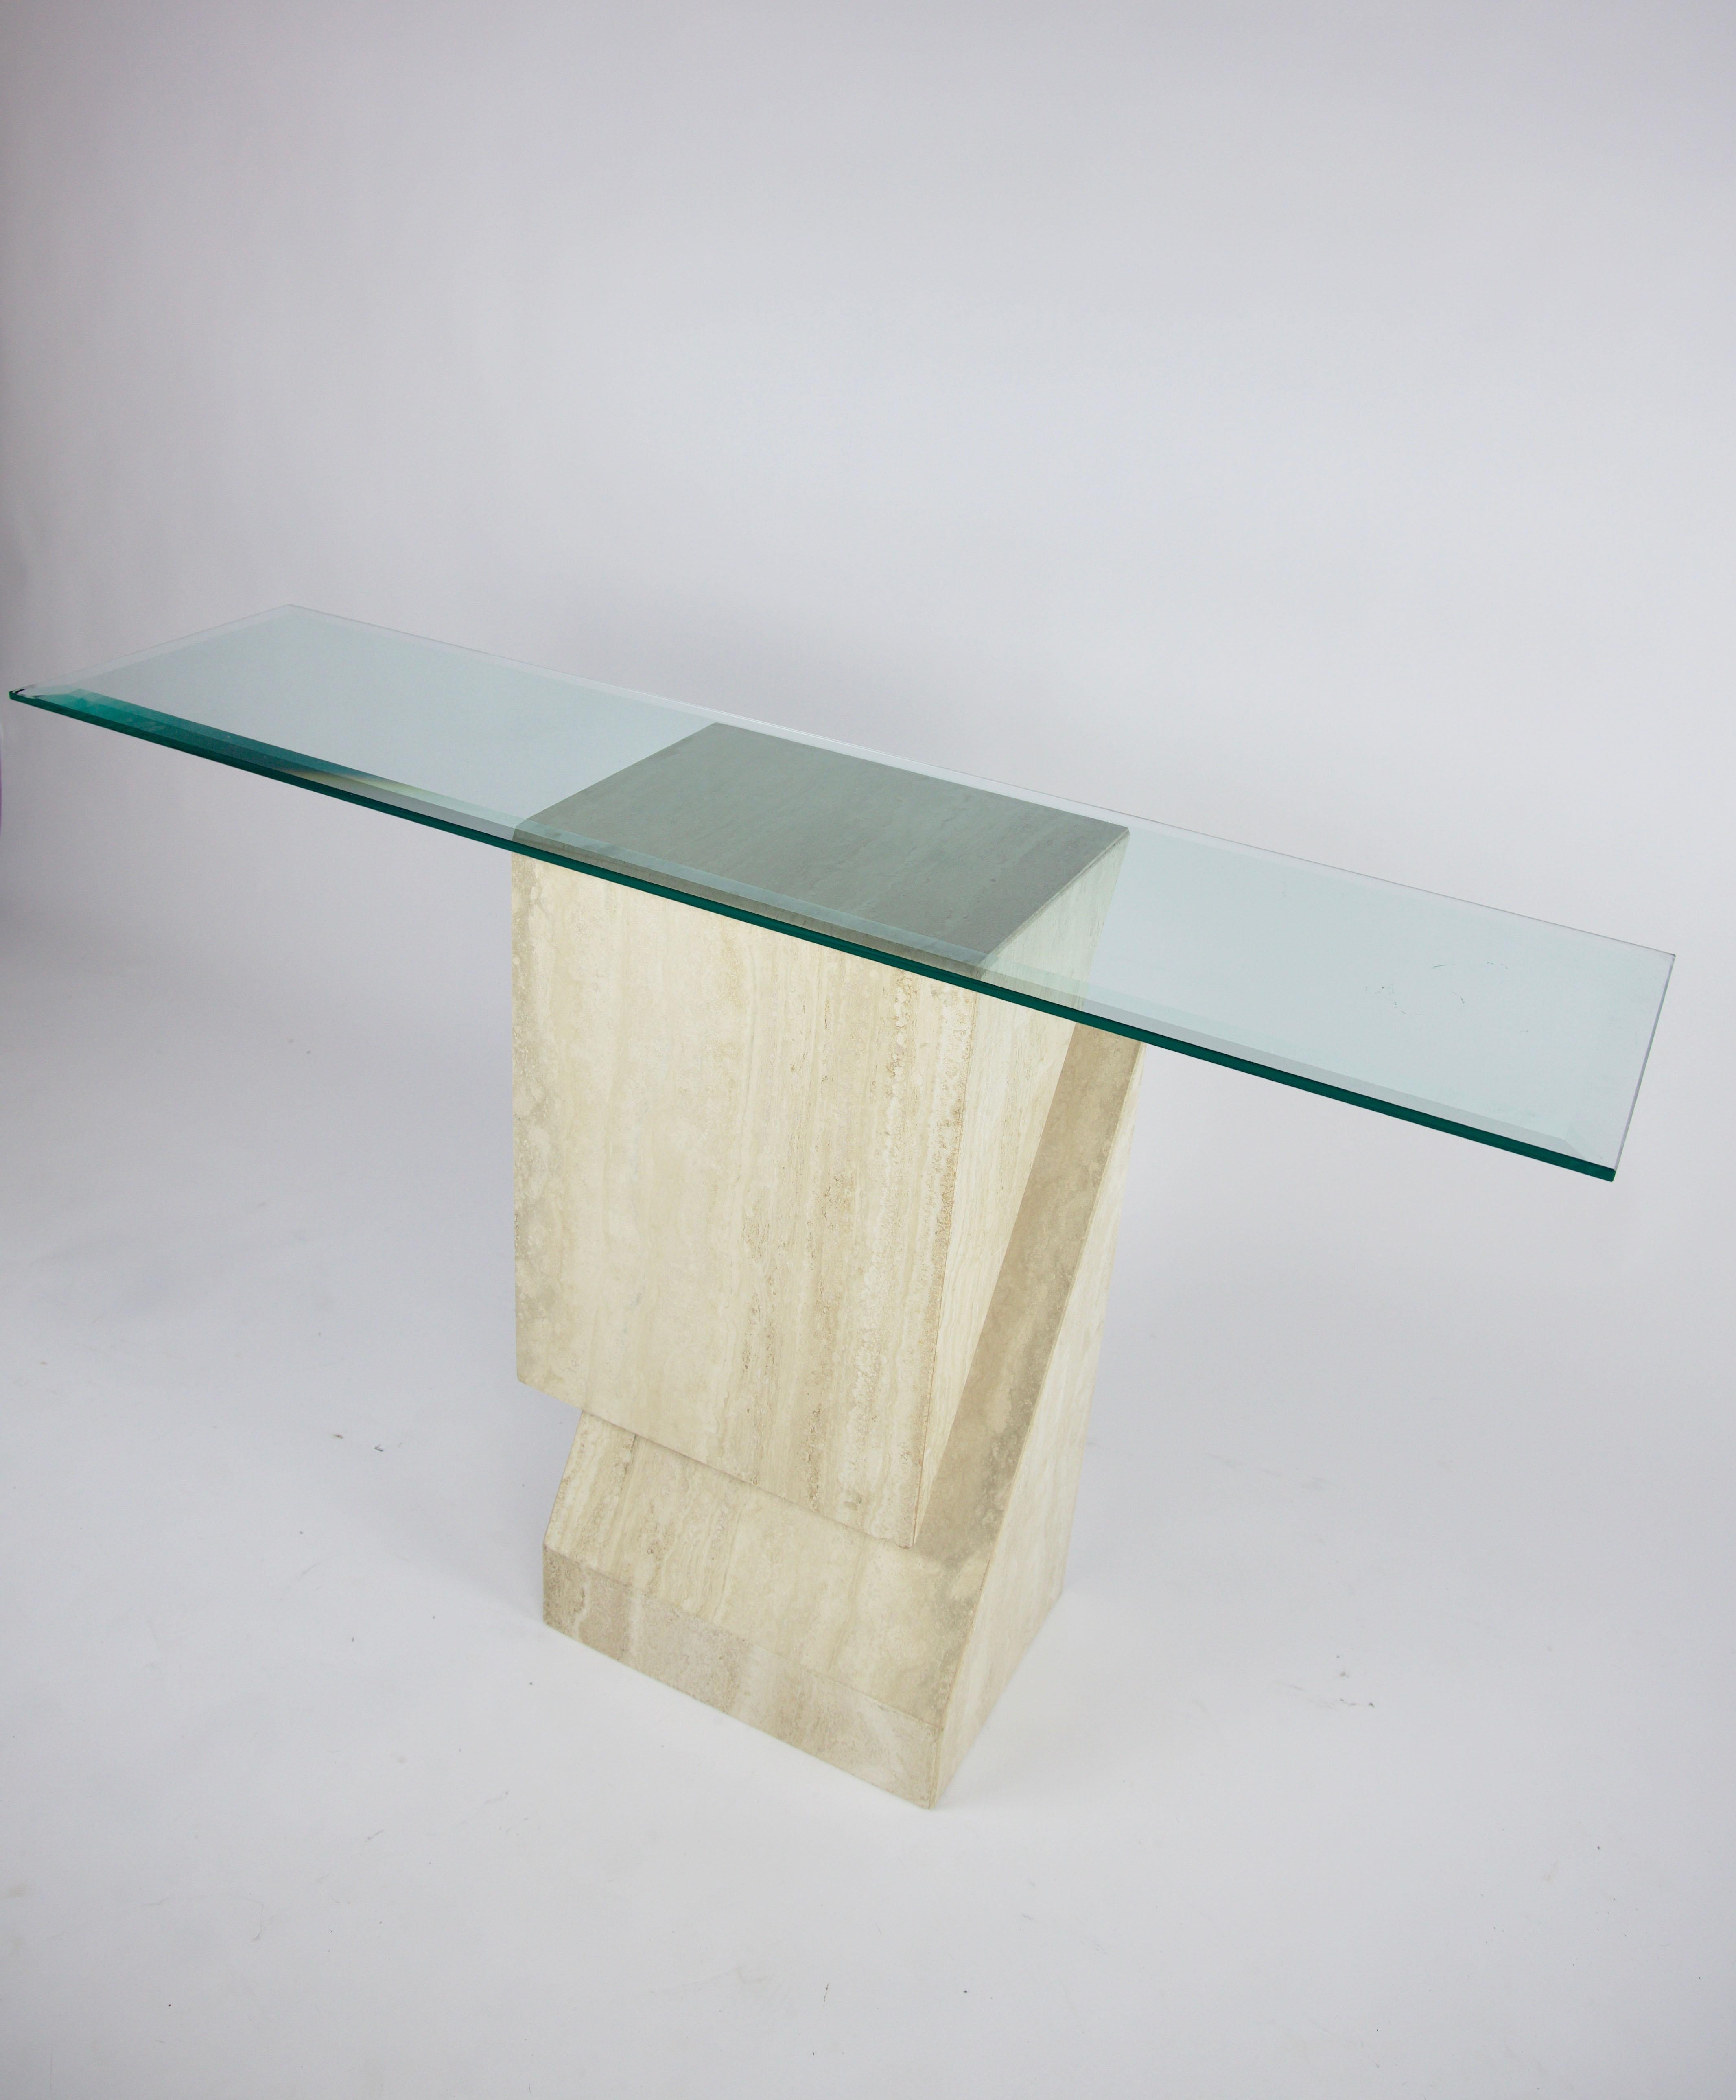 Abstract Travertine table base or pedestal attributed to Up&Up
Looks like 2, three dimensional abstract Travertine triangles interlocking.
Solid Travertine
Can be used as a pedestal or a table base.
 